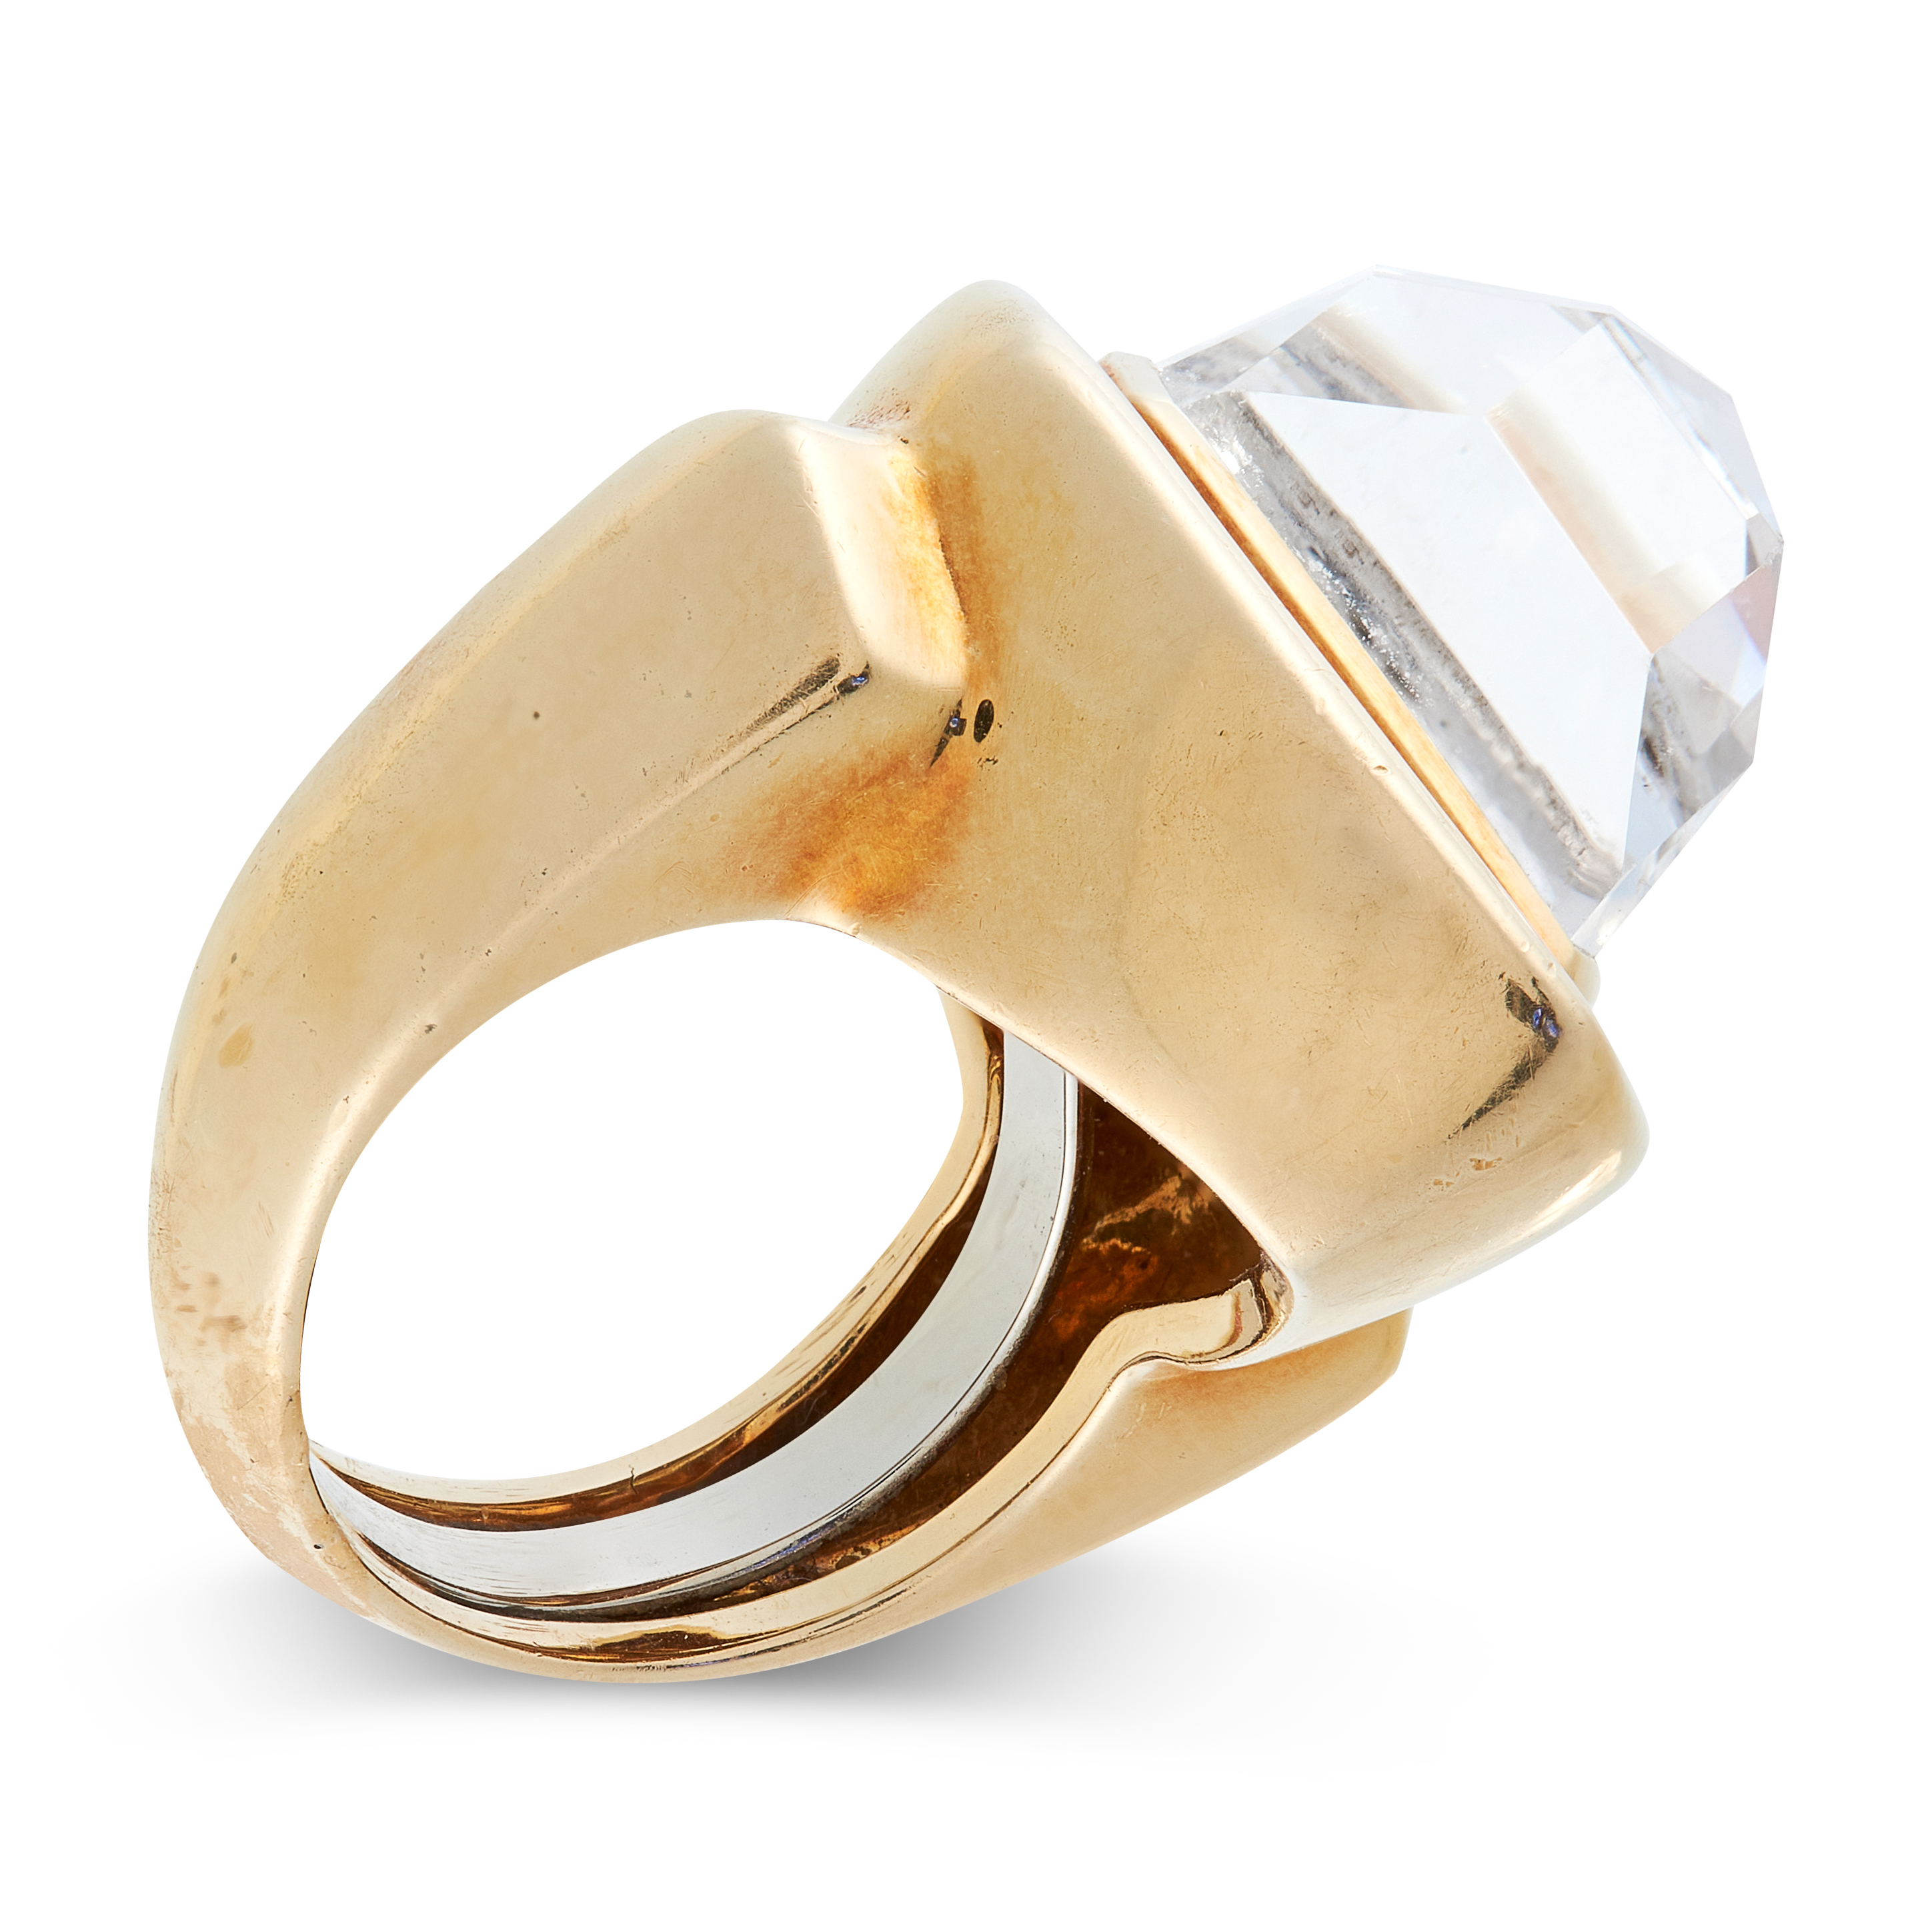 A VINTAGE ROCK CRYSTAL DRESS RING, DAVID WEBB CIRCA 1970 in 18ct yellow gold, designed as a large,